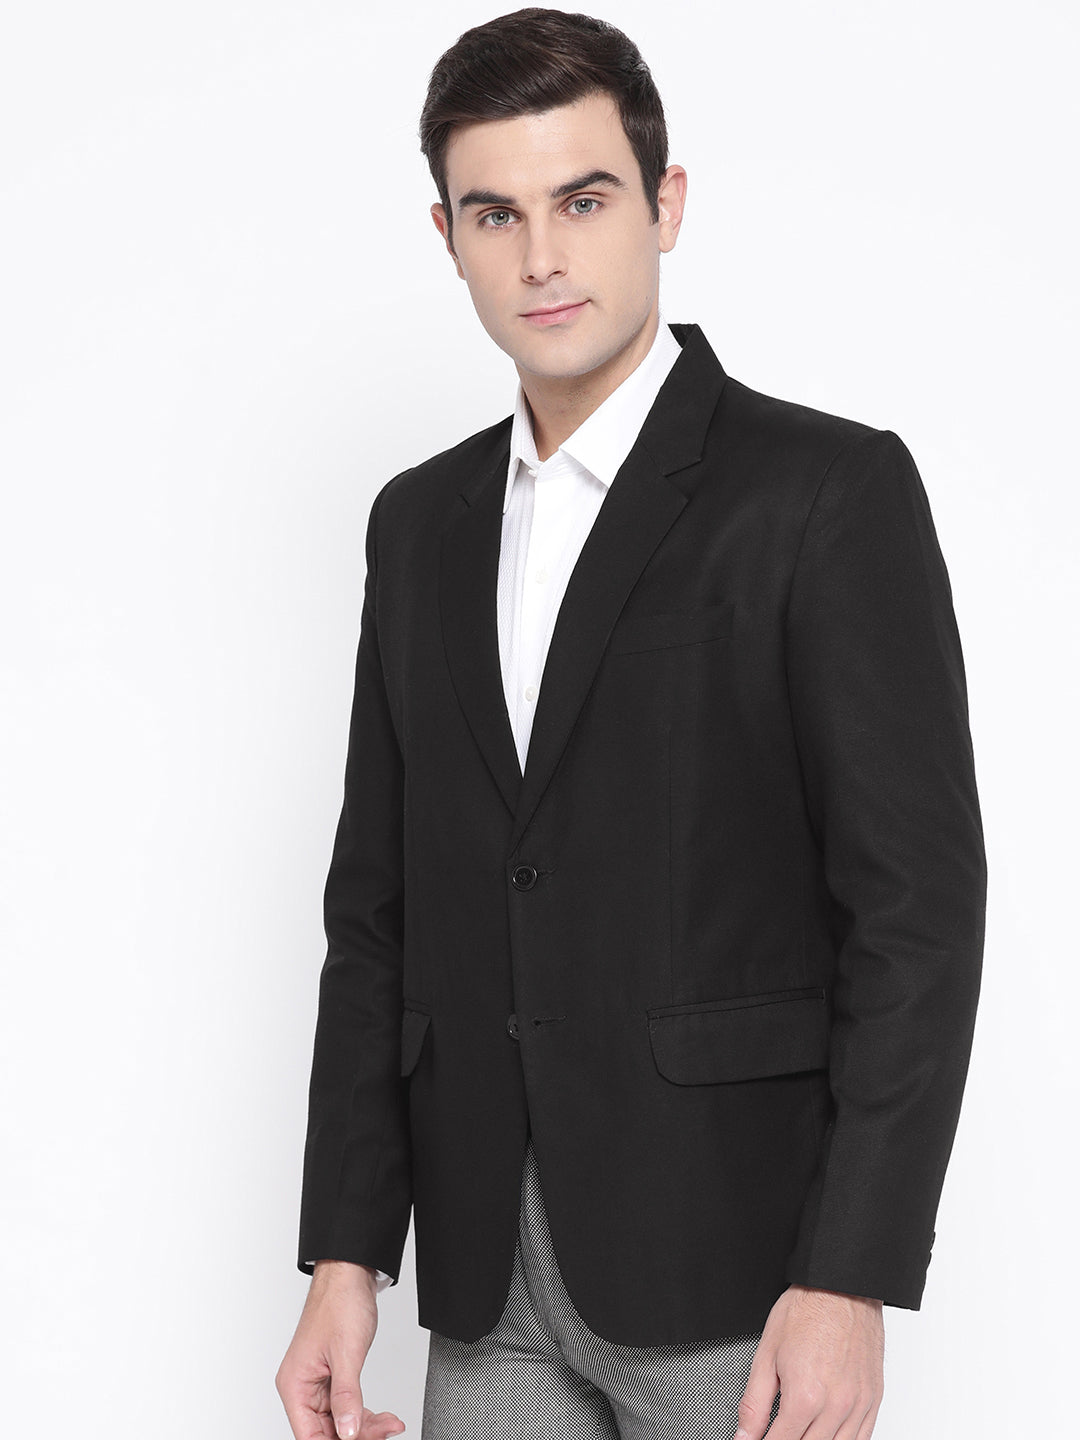 Luxrio Men's Poly Cotton Slim Fit Blazer Stylish for Casual Party Wear